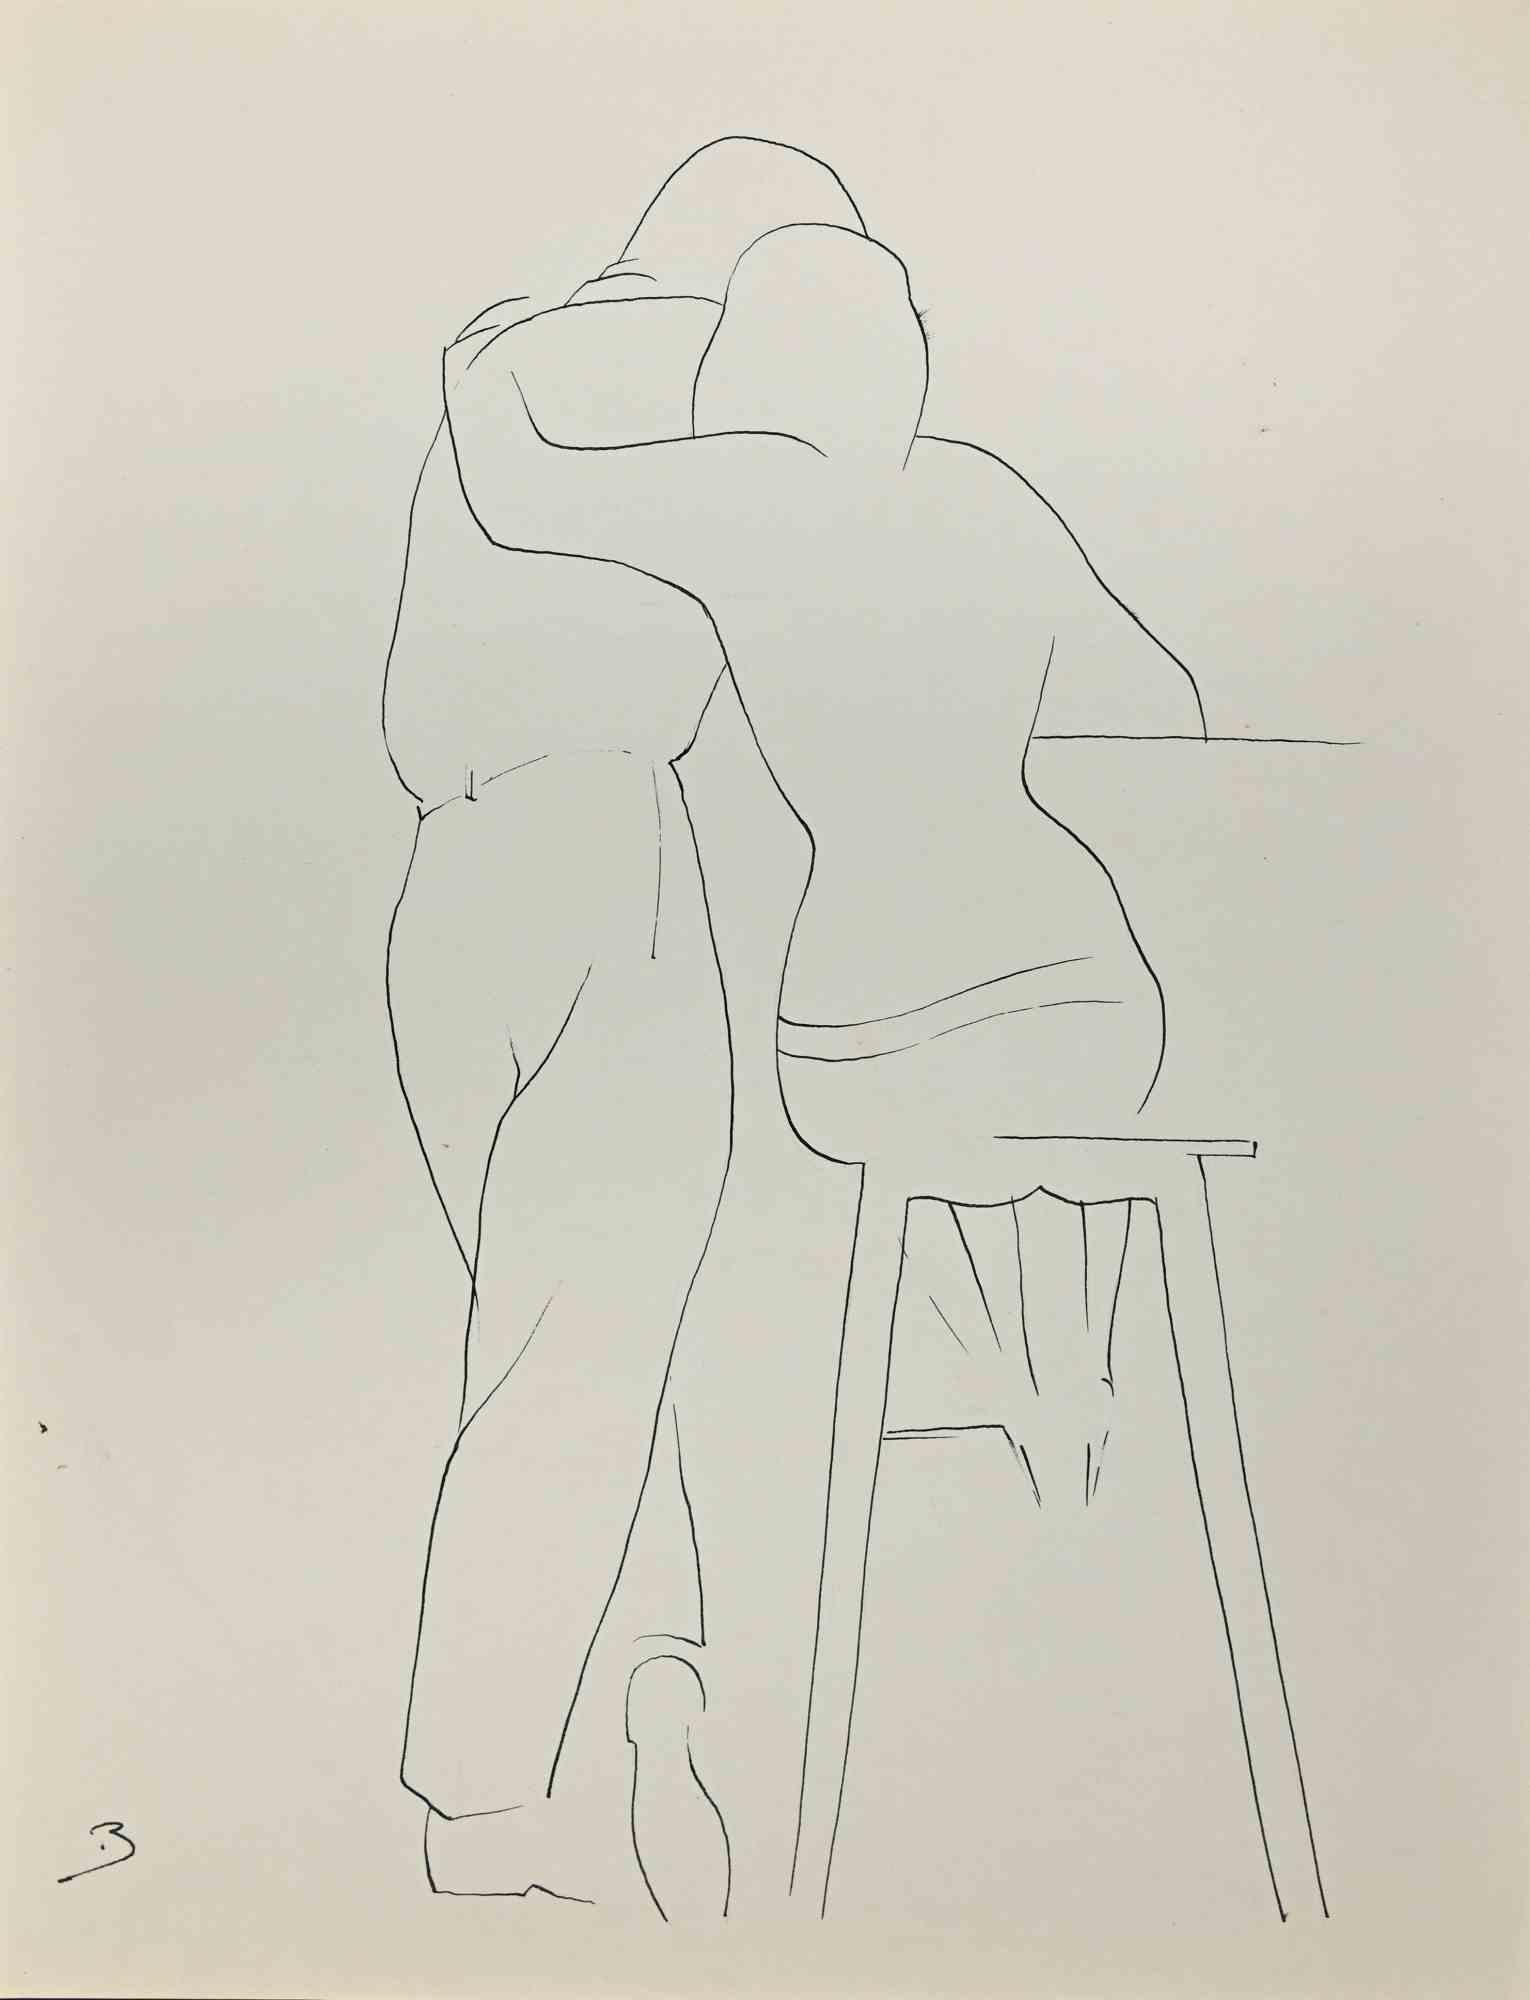 The Couple - Drawing on Paper by Buscot - 1950s